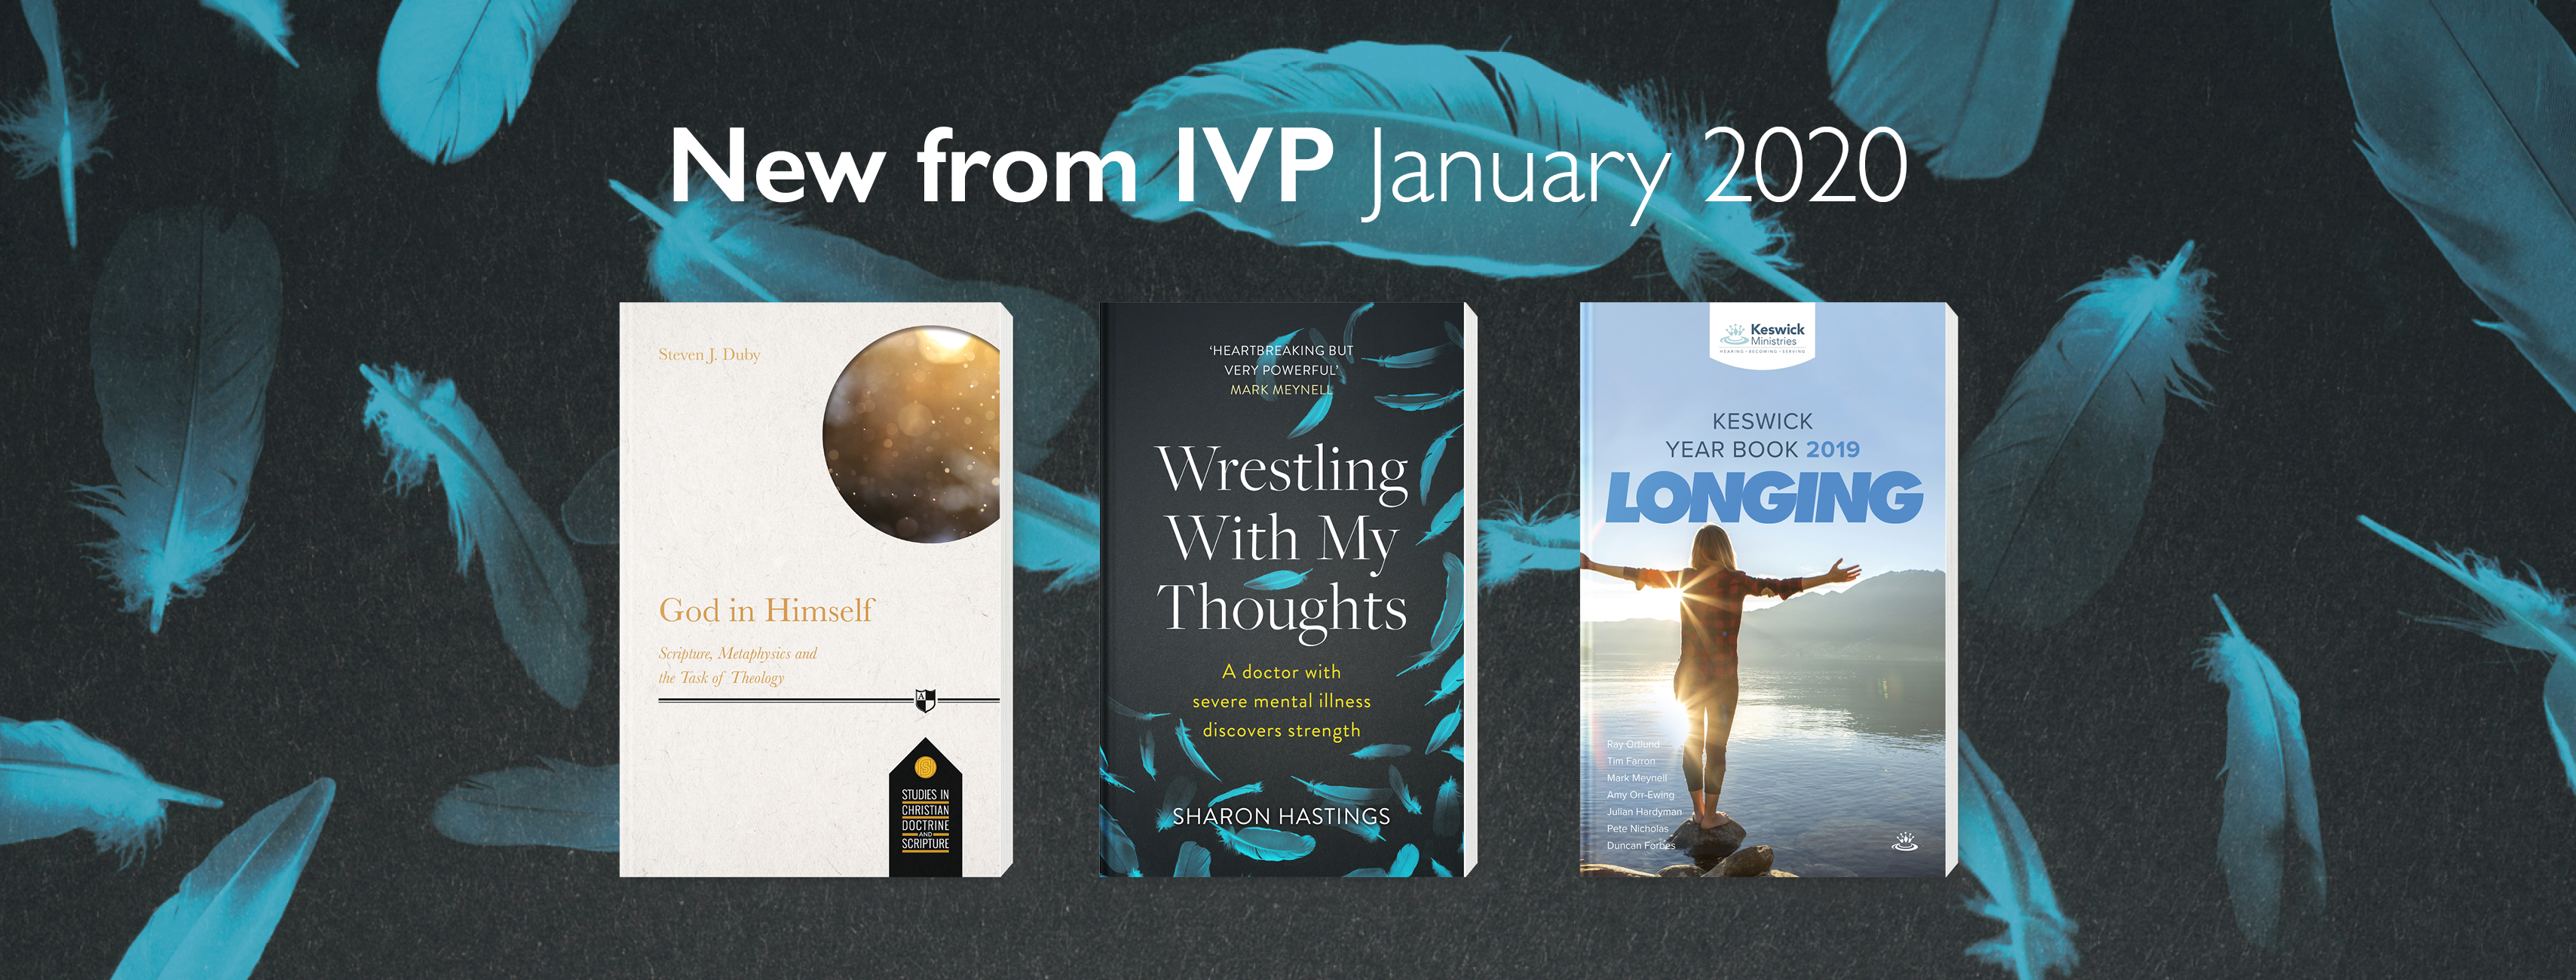 The IVP January 2020 Releases